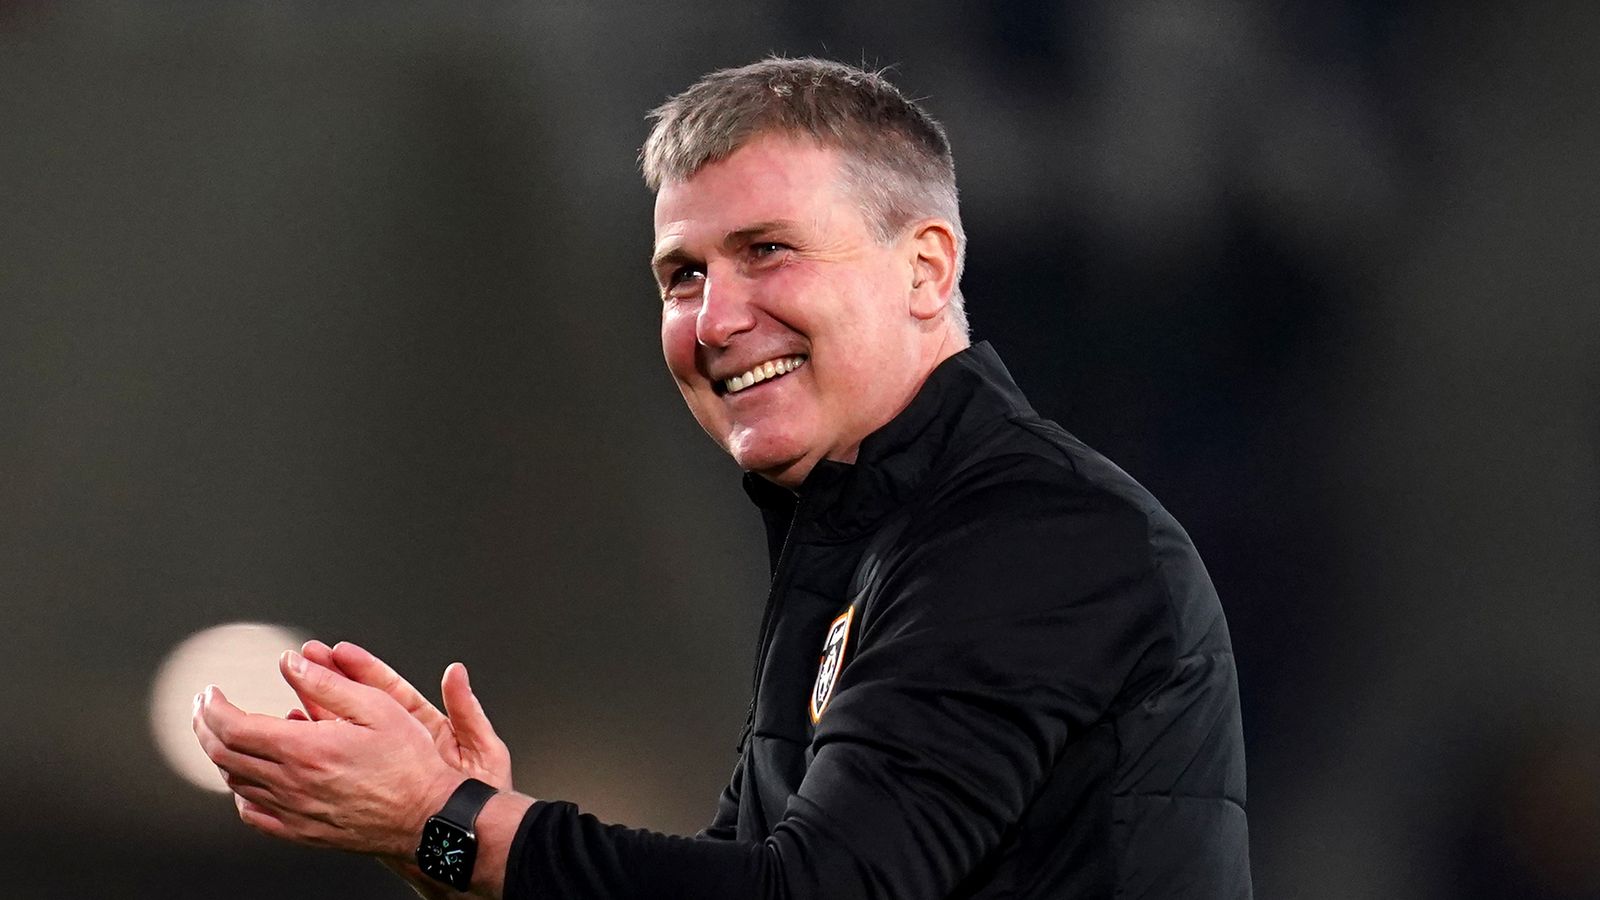  Stephen Kenny's contract with Republic of Ireland extended to 2024 |  Football News Sky News

